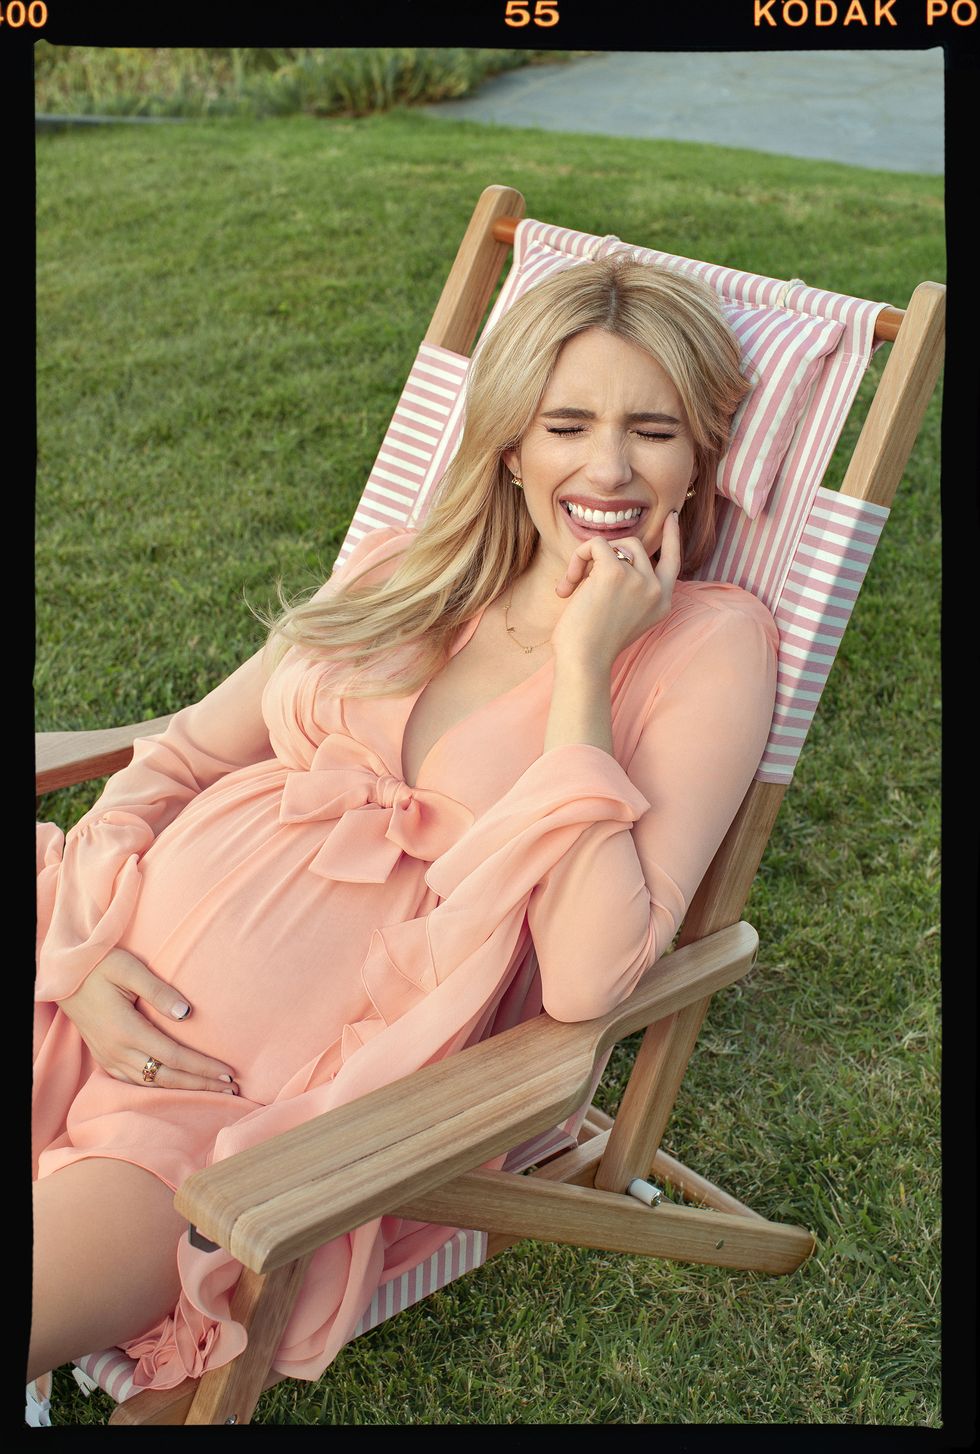 emma roberts, pregnant, wearing peach dress, sitting outside in a striped pink and white lawn chair on the grass